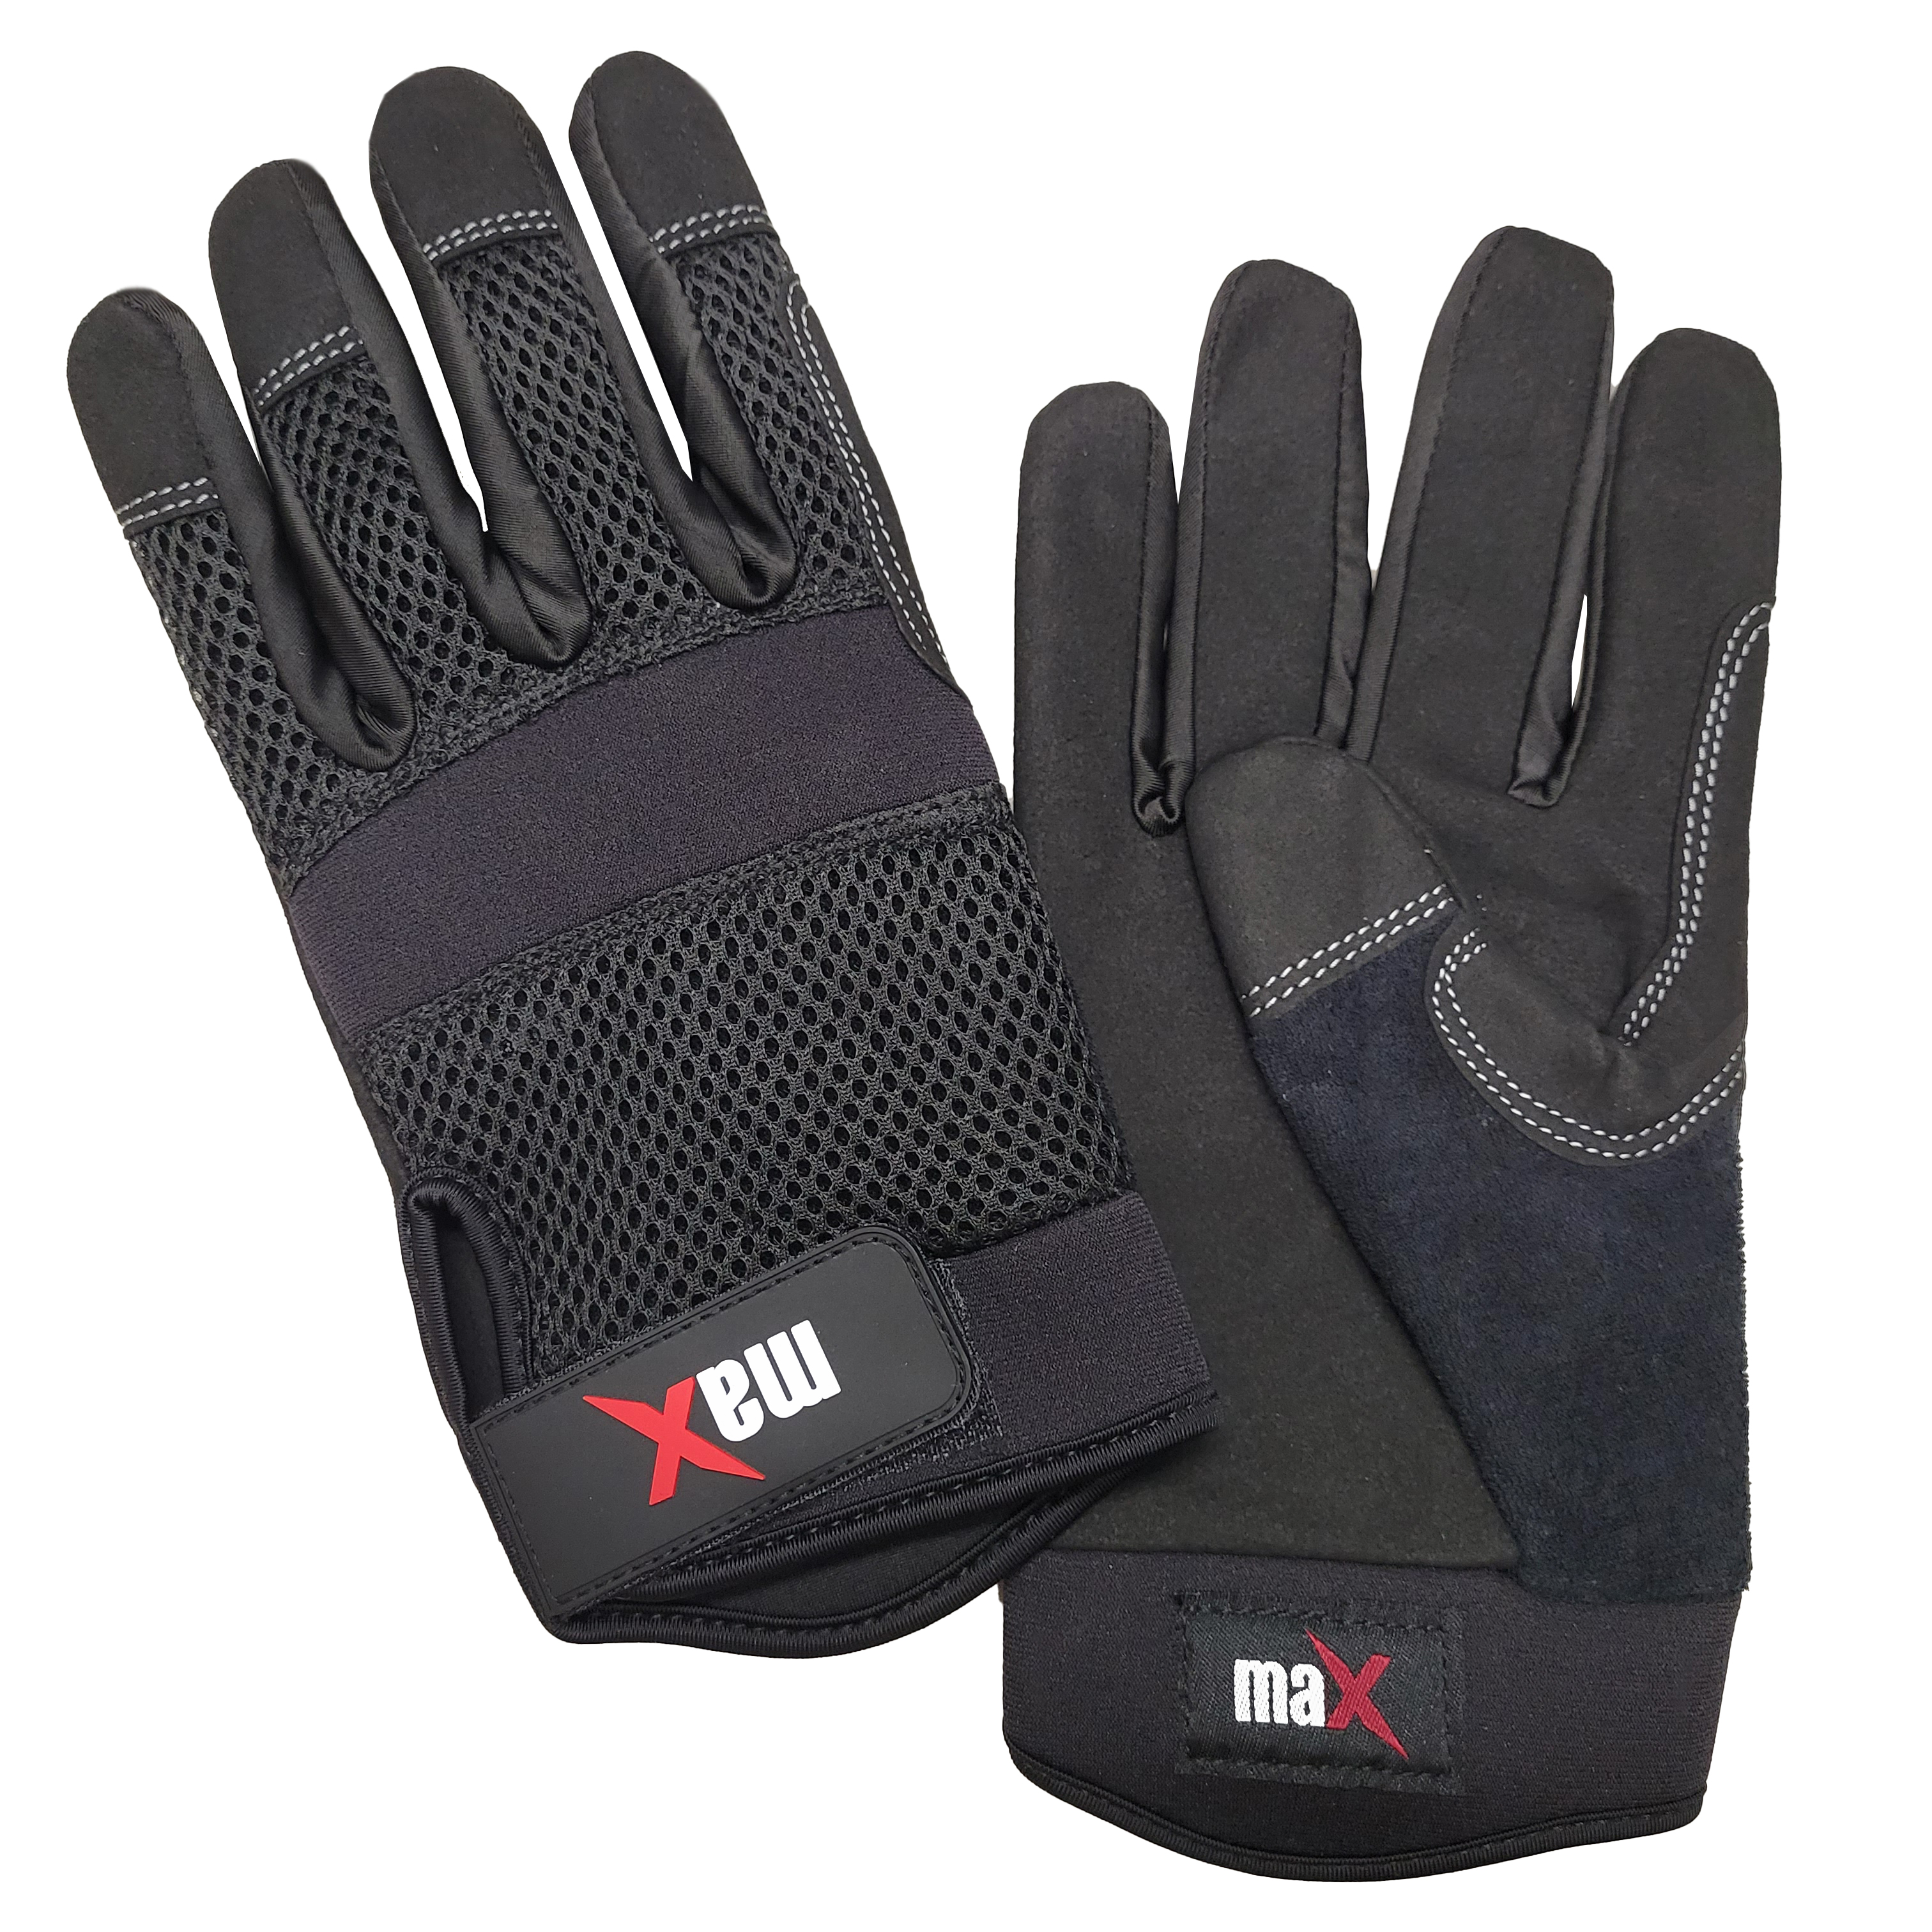 maX&trade; Sport Gloves with Mesh Back